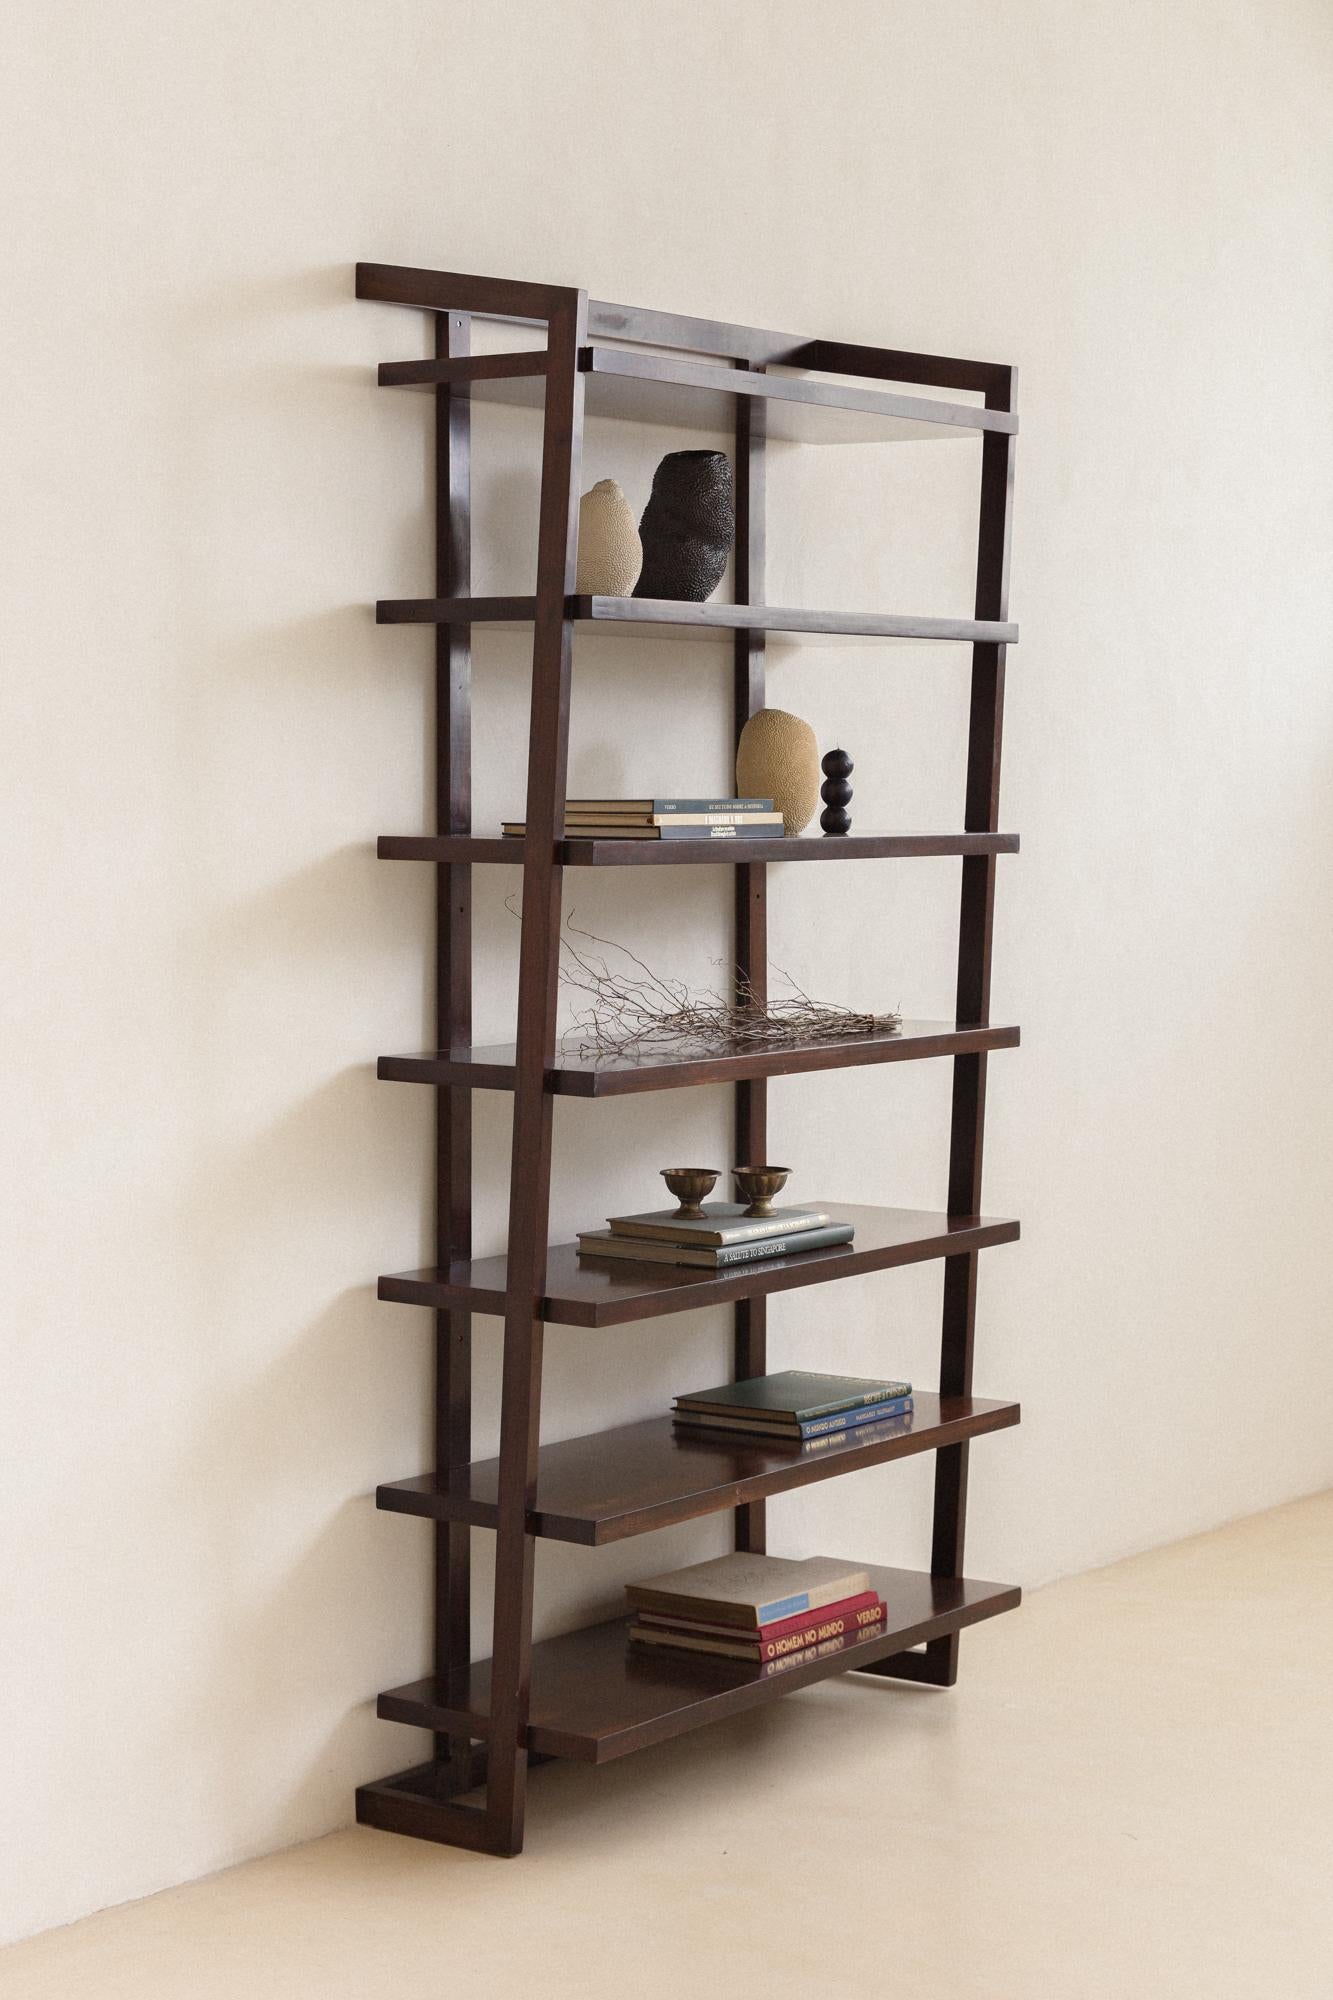 This bookshelf was designed by Joaquim Tenreiro (1906-1992) in the 1960s and produced by the company Tenreiro Arquitetura e Interiores.

The piece is made of solid Rosewood and is attached to the wall in two fixation points, by using a few screws.